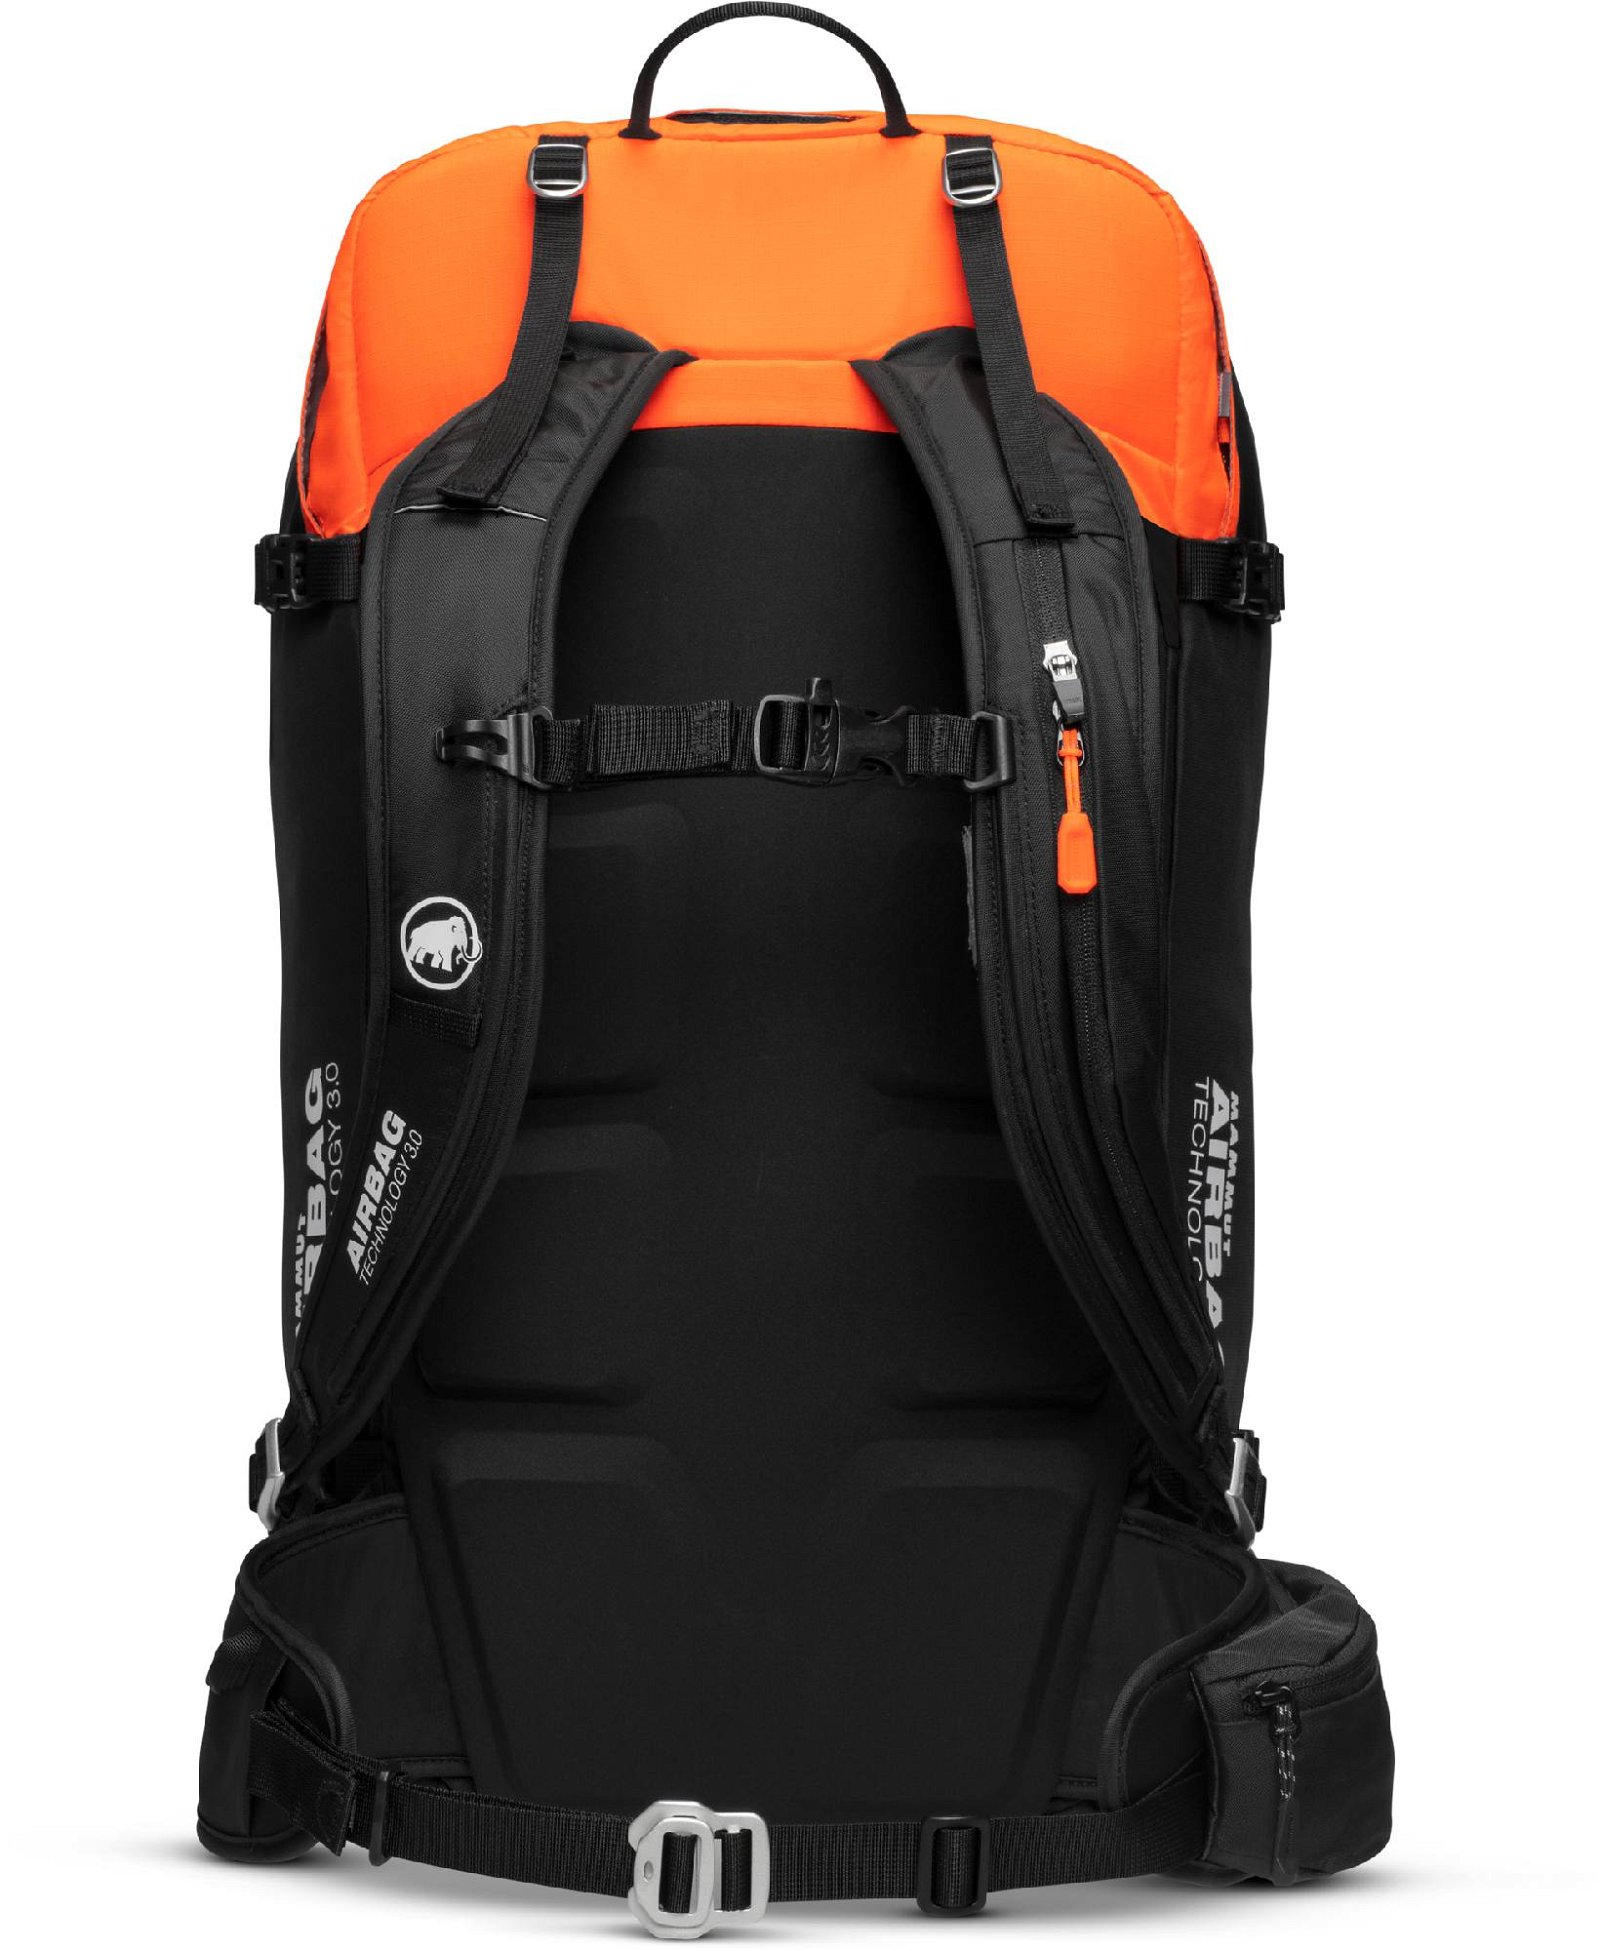 Mammut Tour 40 Removable Airbag 3.0